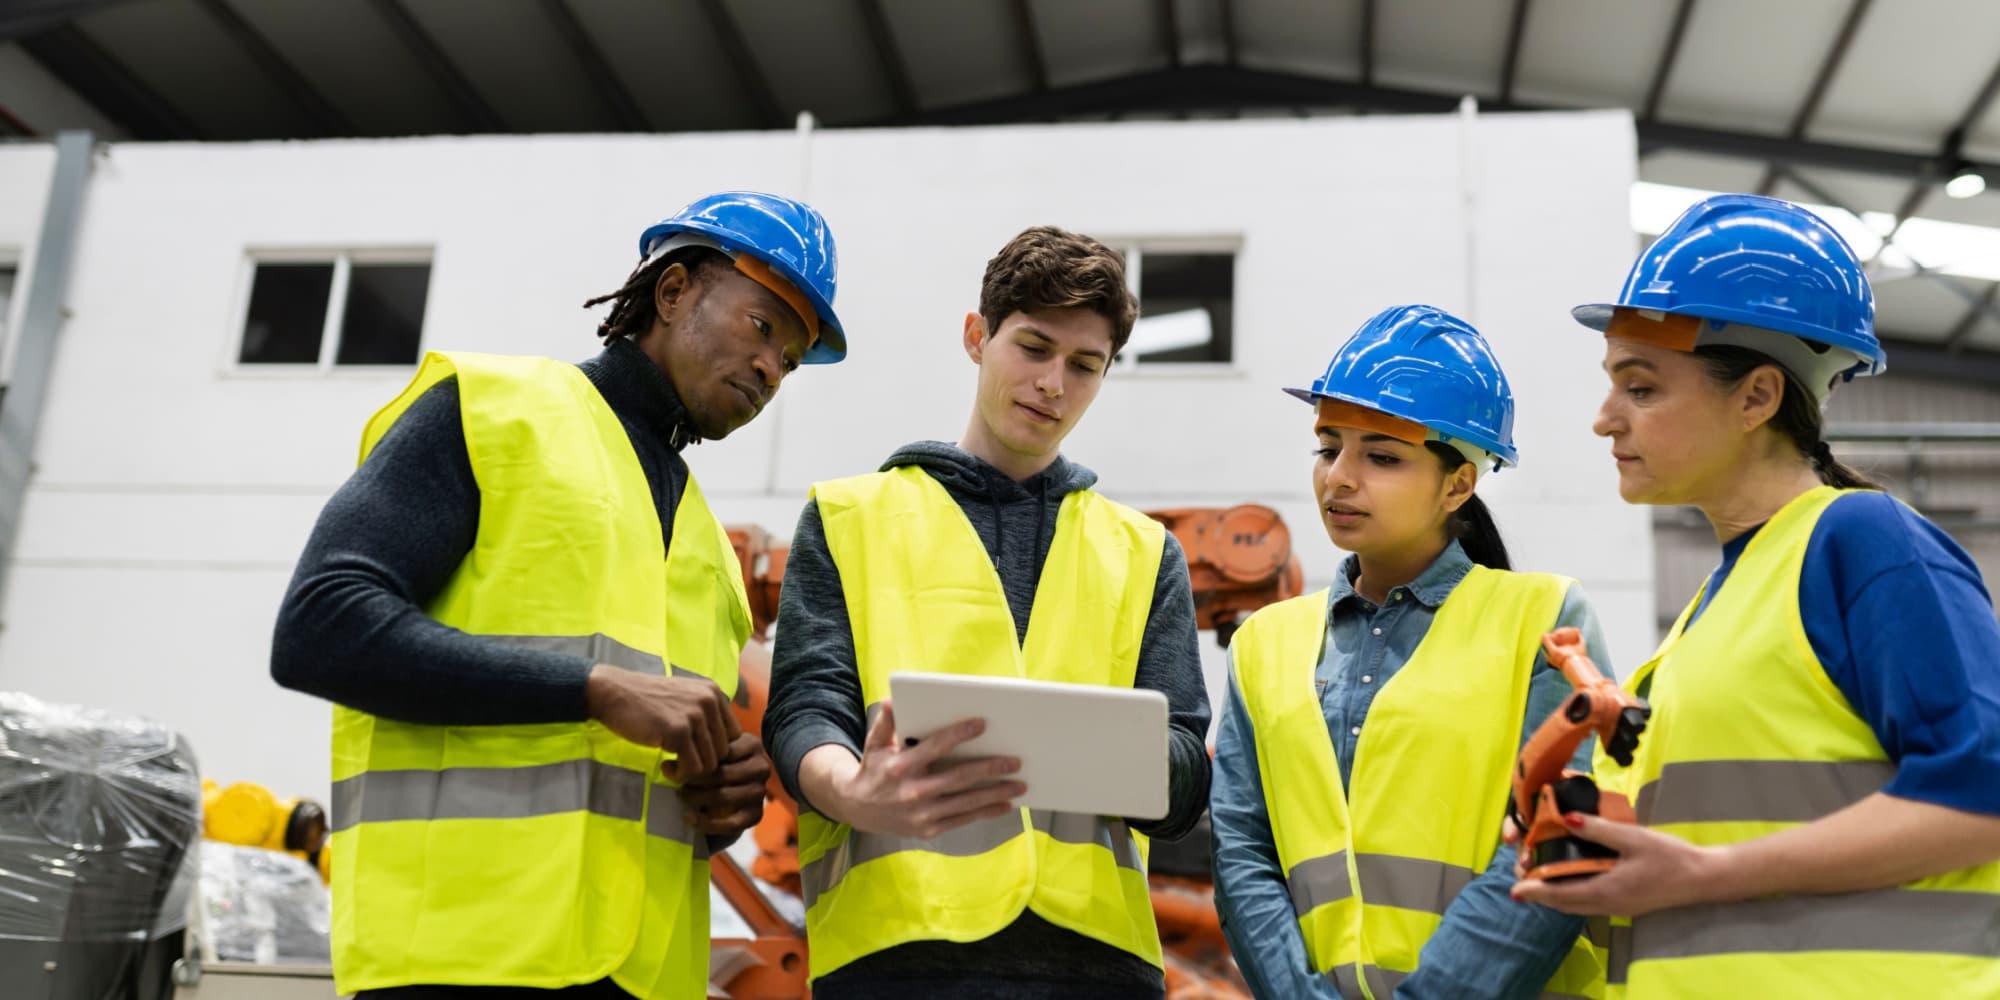 Group of multi-racial construction workers gather around tablet learning